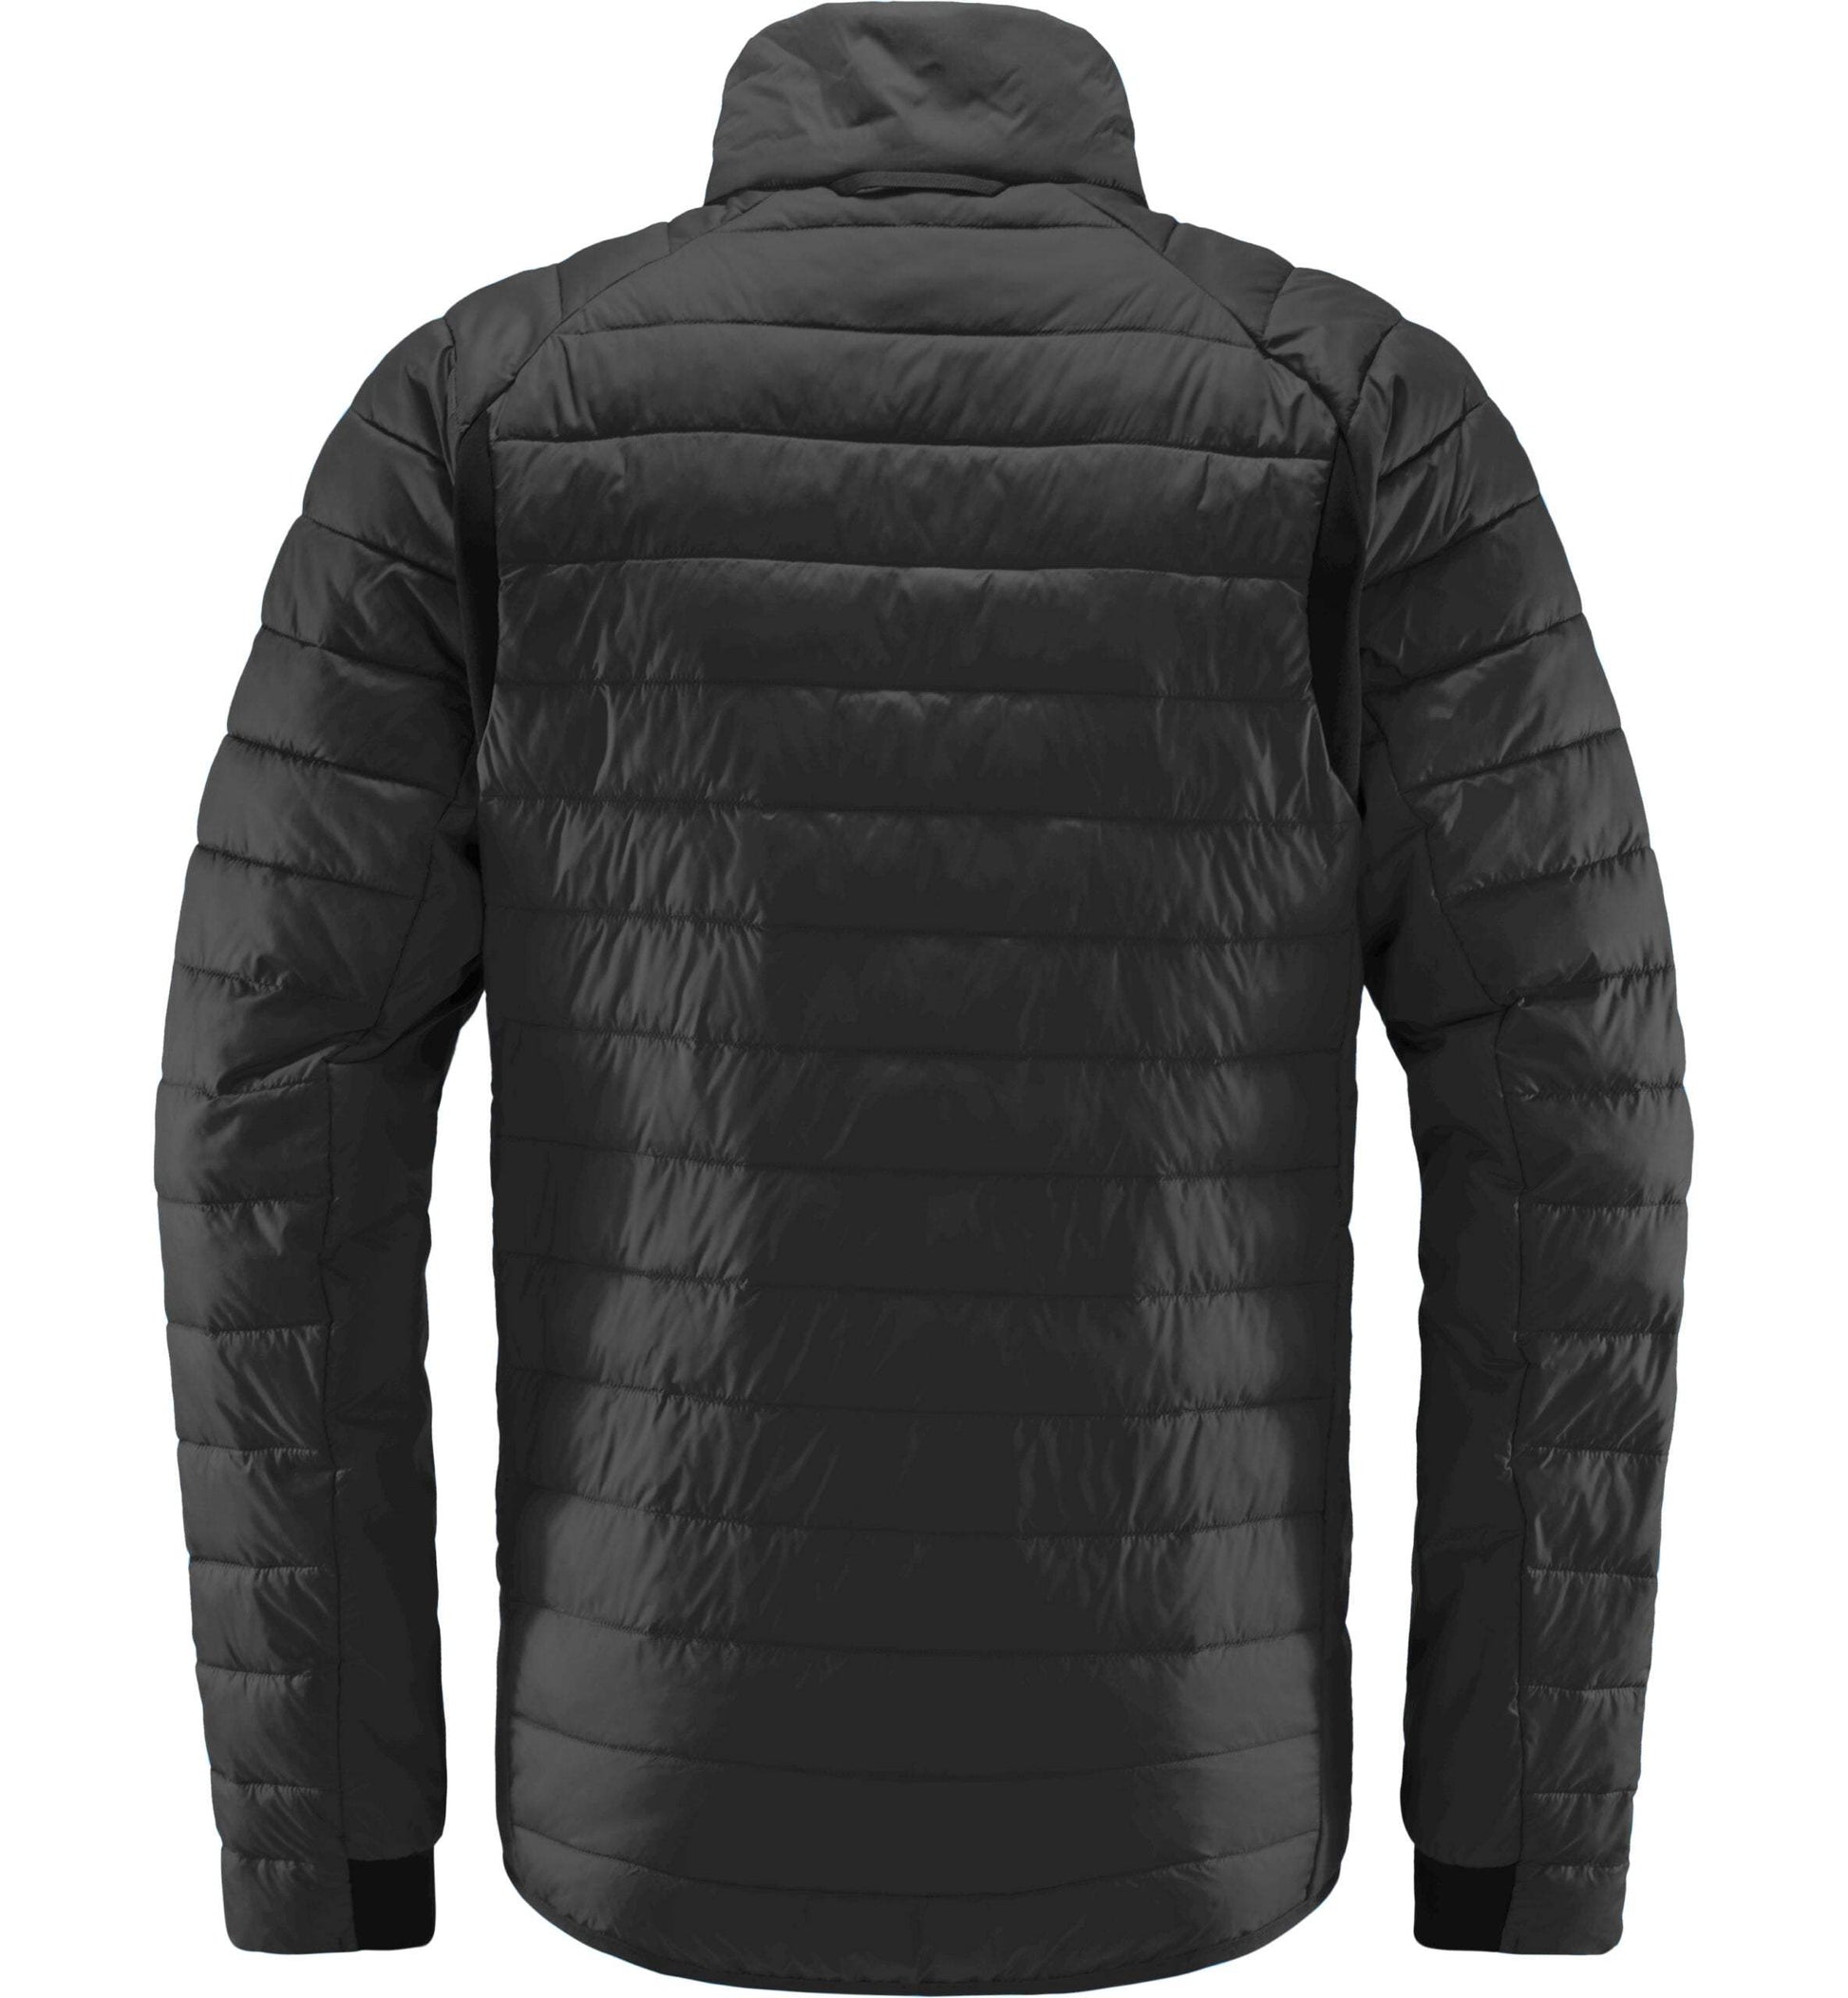 Haglofs Men’s Spire Mimic Jacket - The Luxury Promotional Gifts Company Limited